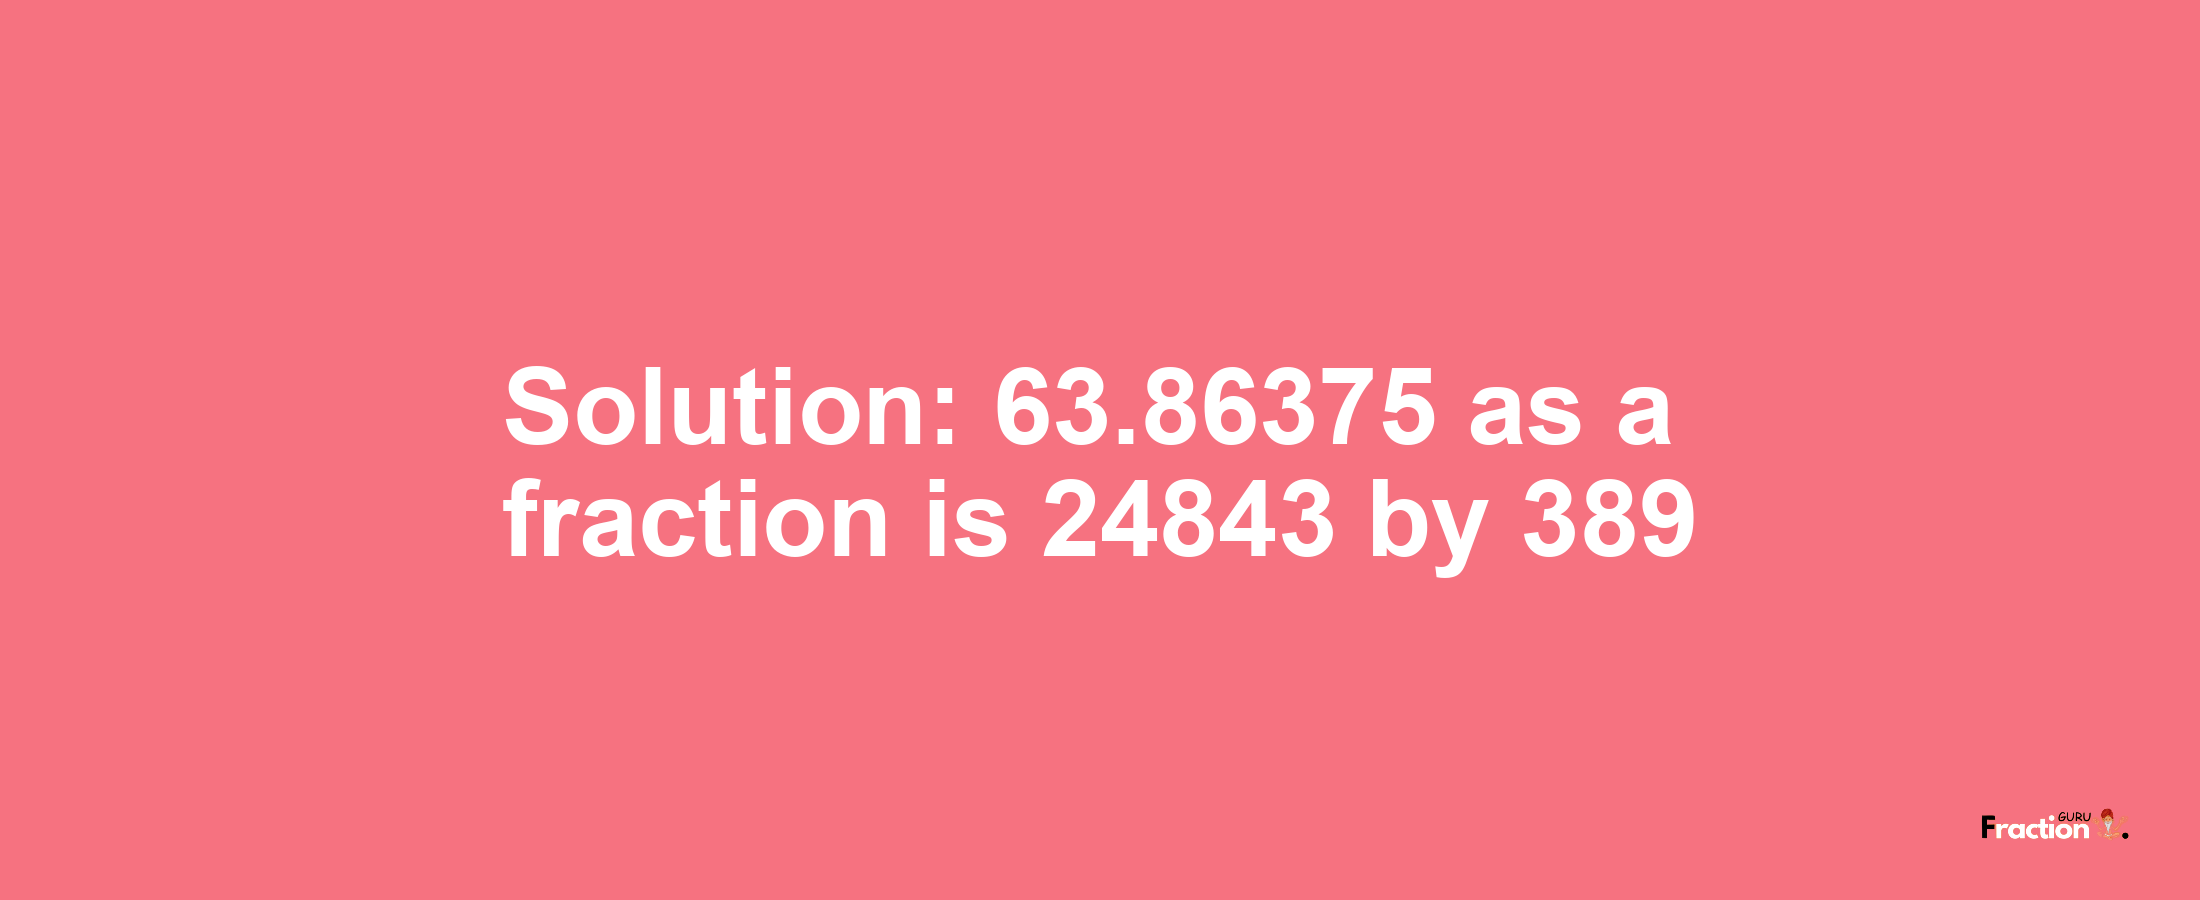 Solution:63.86375 as a fraction is 24843/389